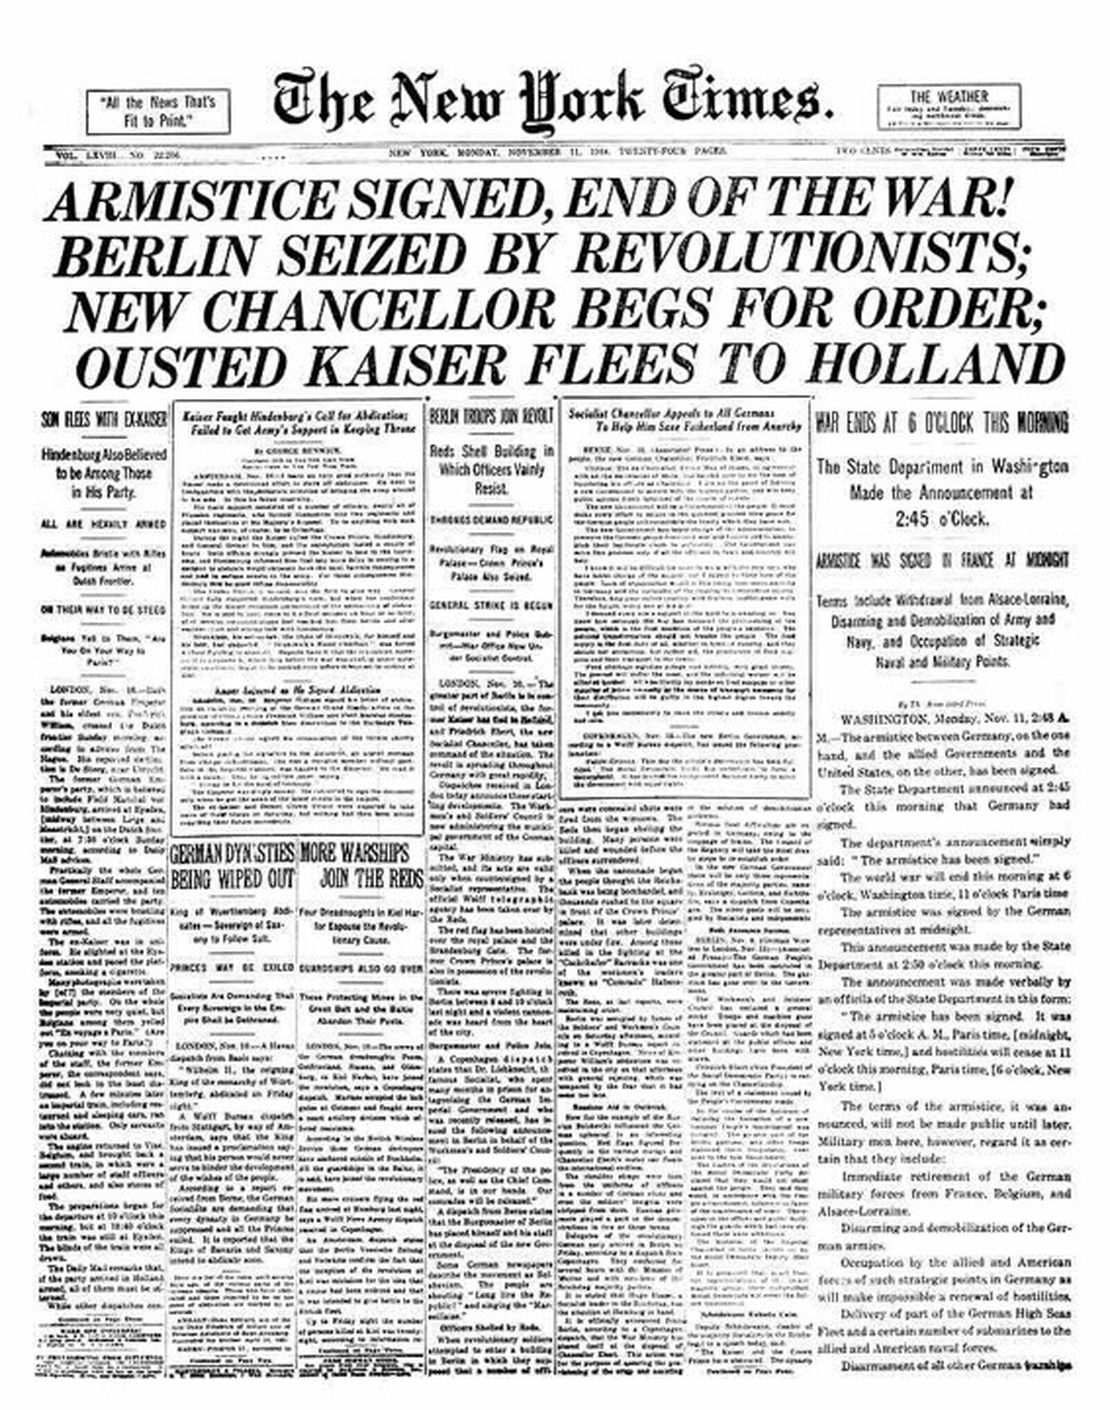 Armistice Day, World War I ends on the, 11th hour of the, 11th day of the, 11th month.